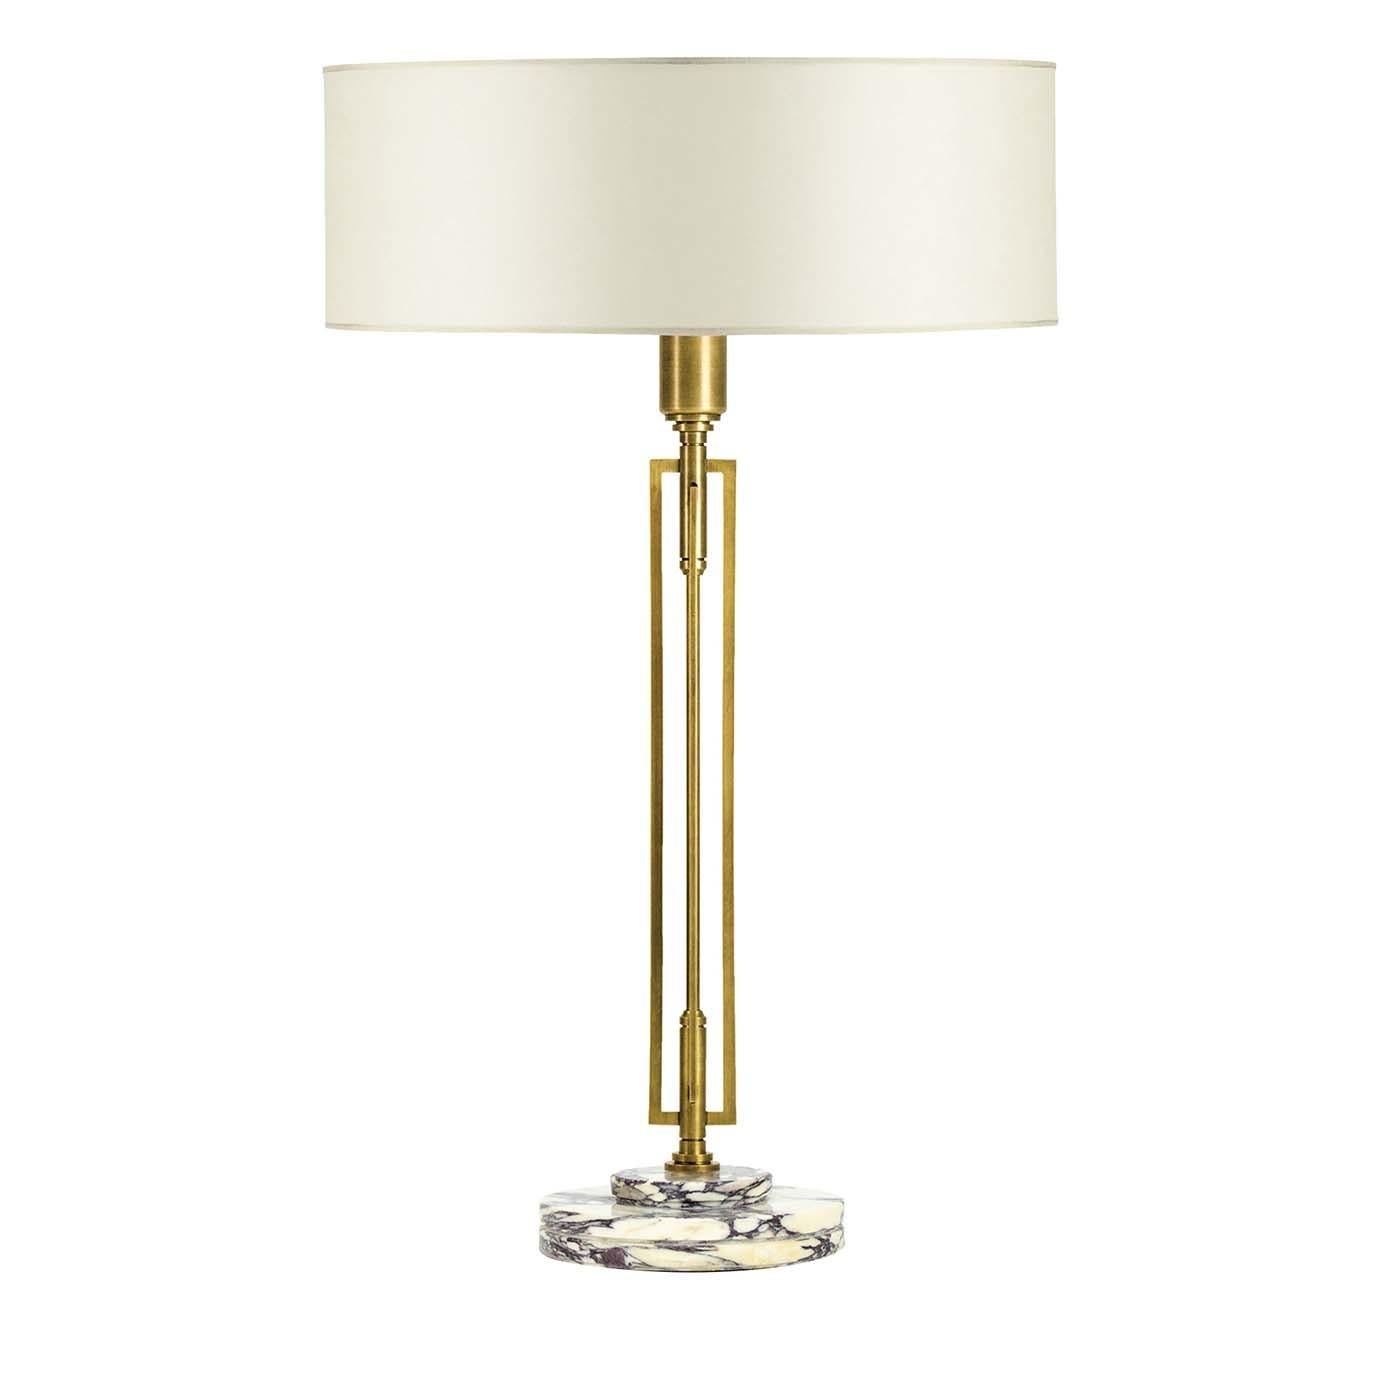 A perfect pick for midcentury and contemporary interiors alike, this table lamp showcases a streamlined design with a steel structure on a round base made of Breccia Viola marble with a stunning creamy-white color with veins of gold, tan, and grey.